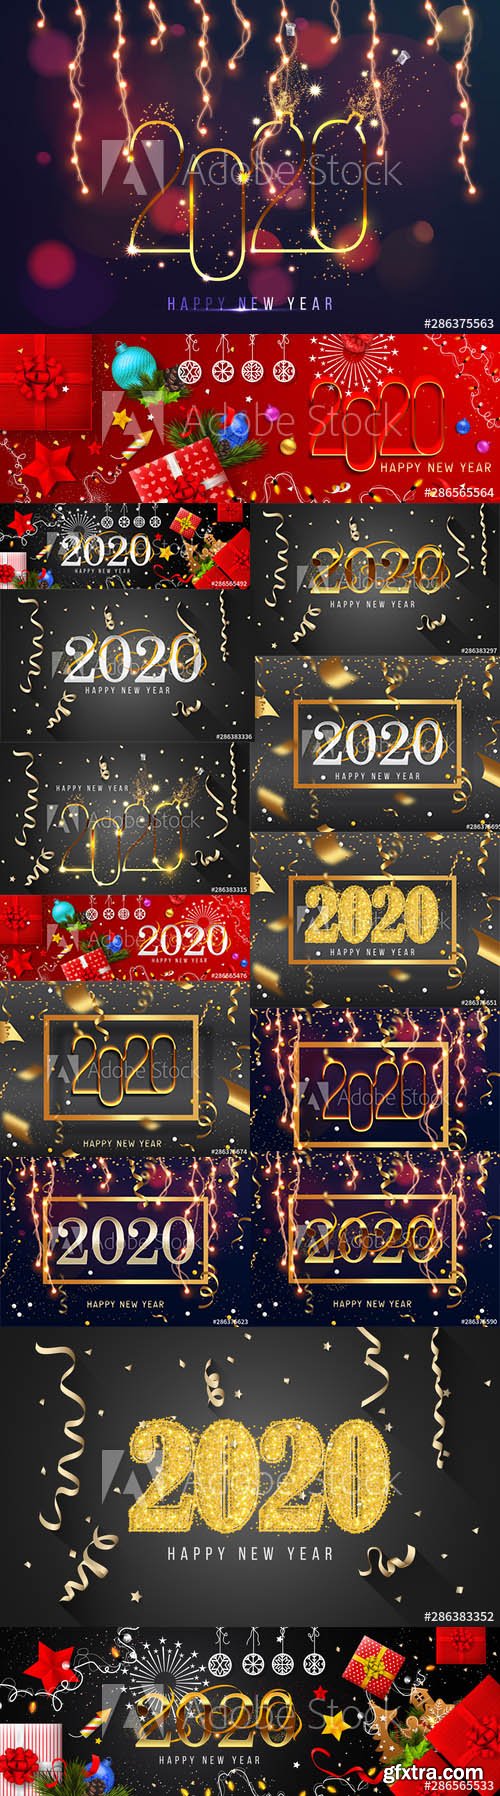 2020 Happy New Year Greeting Card and New Year Background vol.7